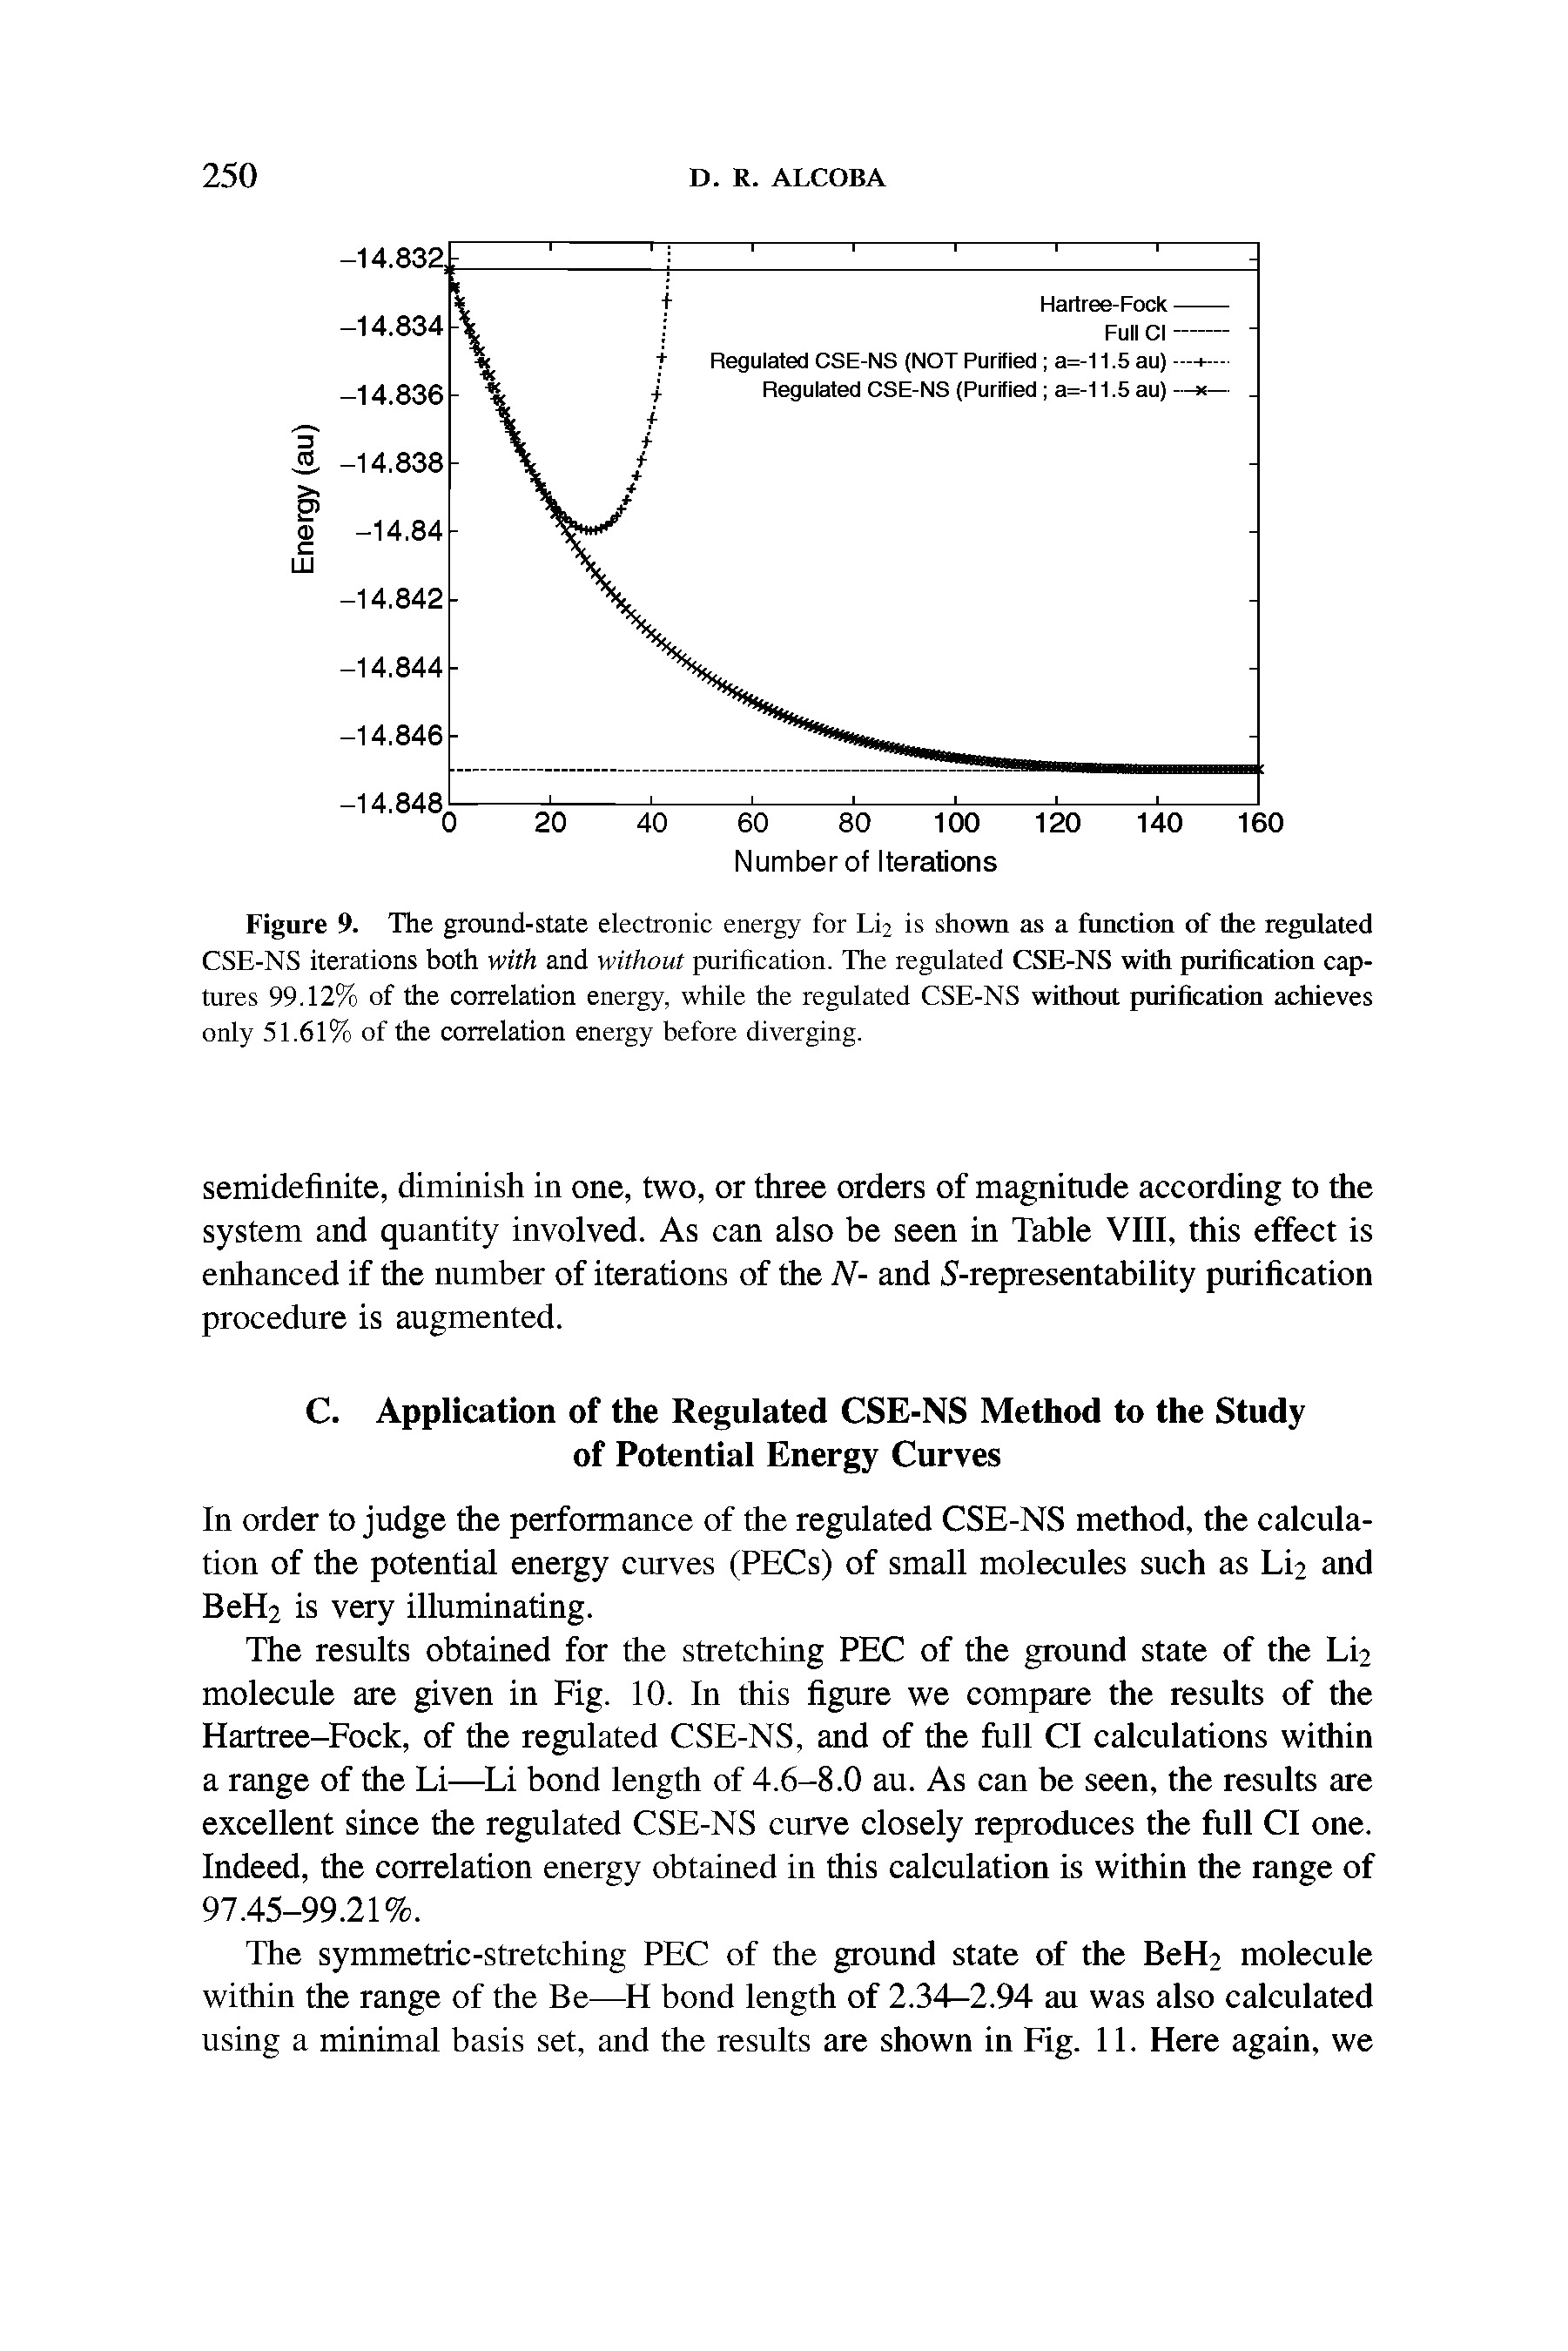 Figure 9. The ground-state electronic energy for O2 is shown as a function of the regulated CSE-NS iterations both with and without purification. The regulated CSE-NS with purification captures 99.12% of the correlation energy, while the regulated CSE-NS without purification achieves only 51.61% of the correlation energy before diverging.